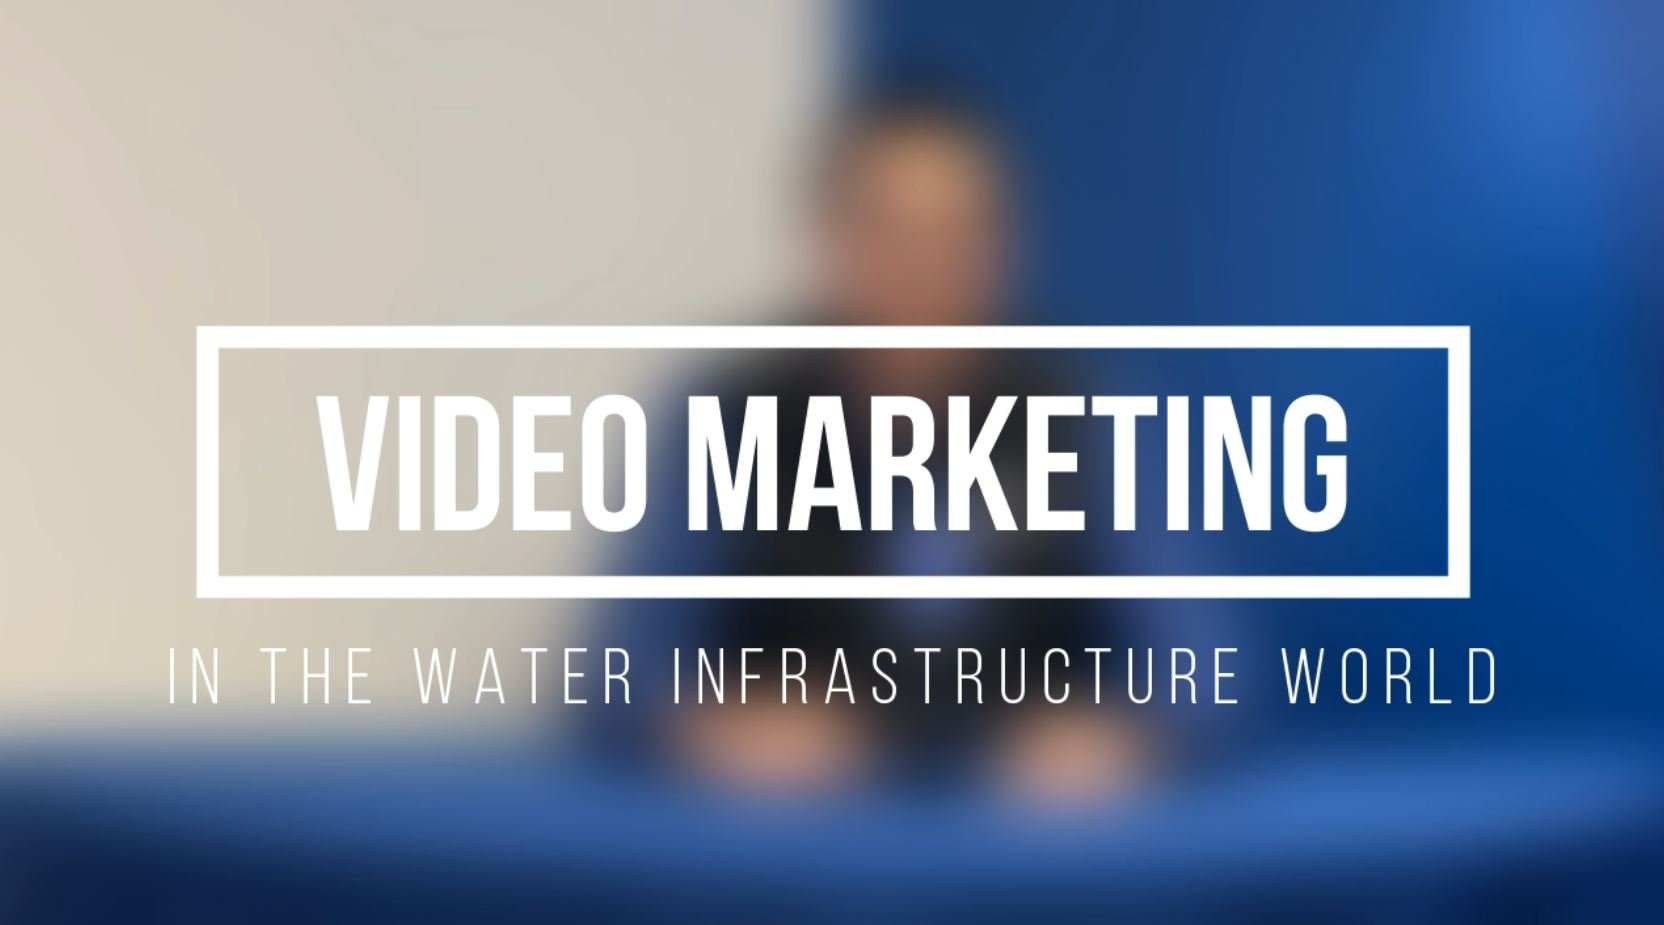 Video Marketing in the Water Infrastructure World